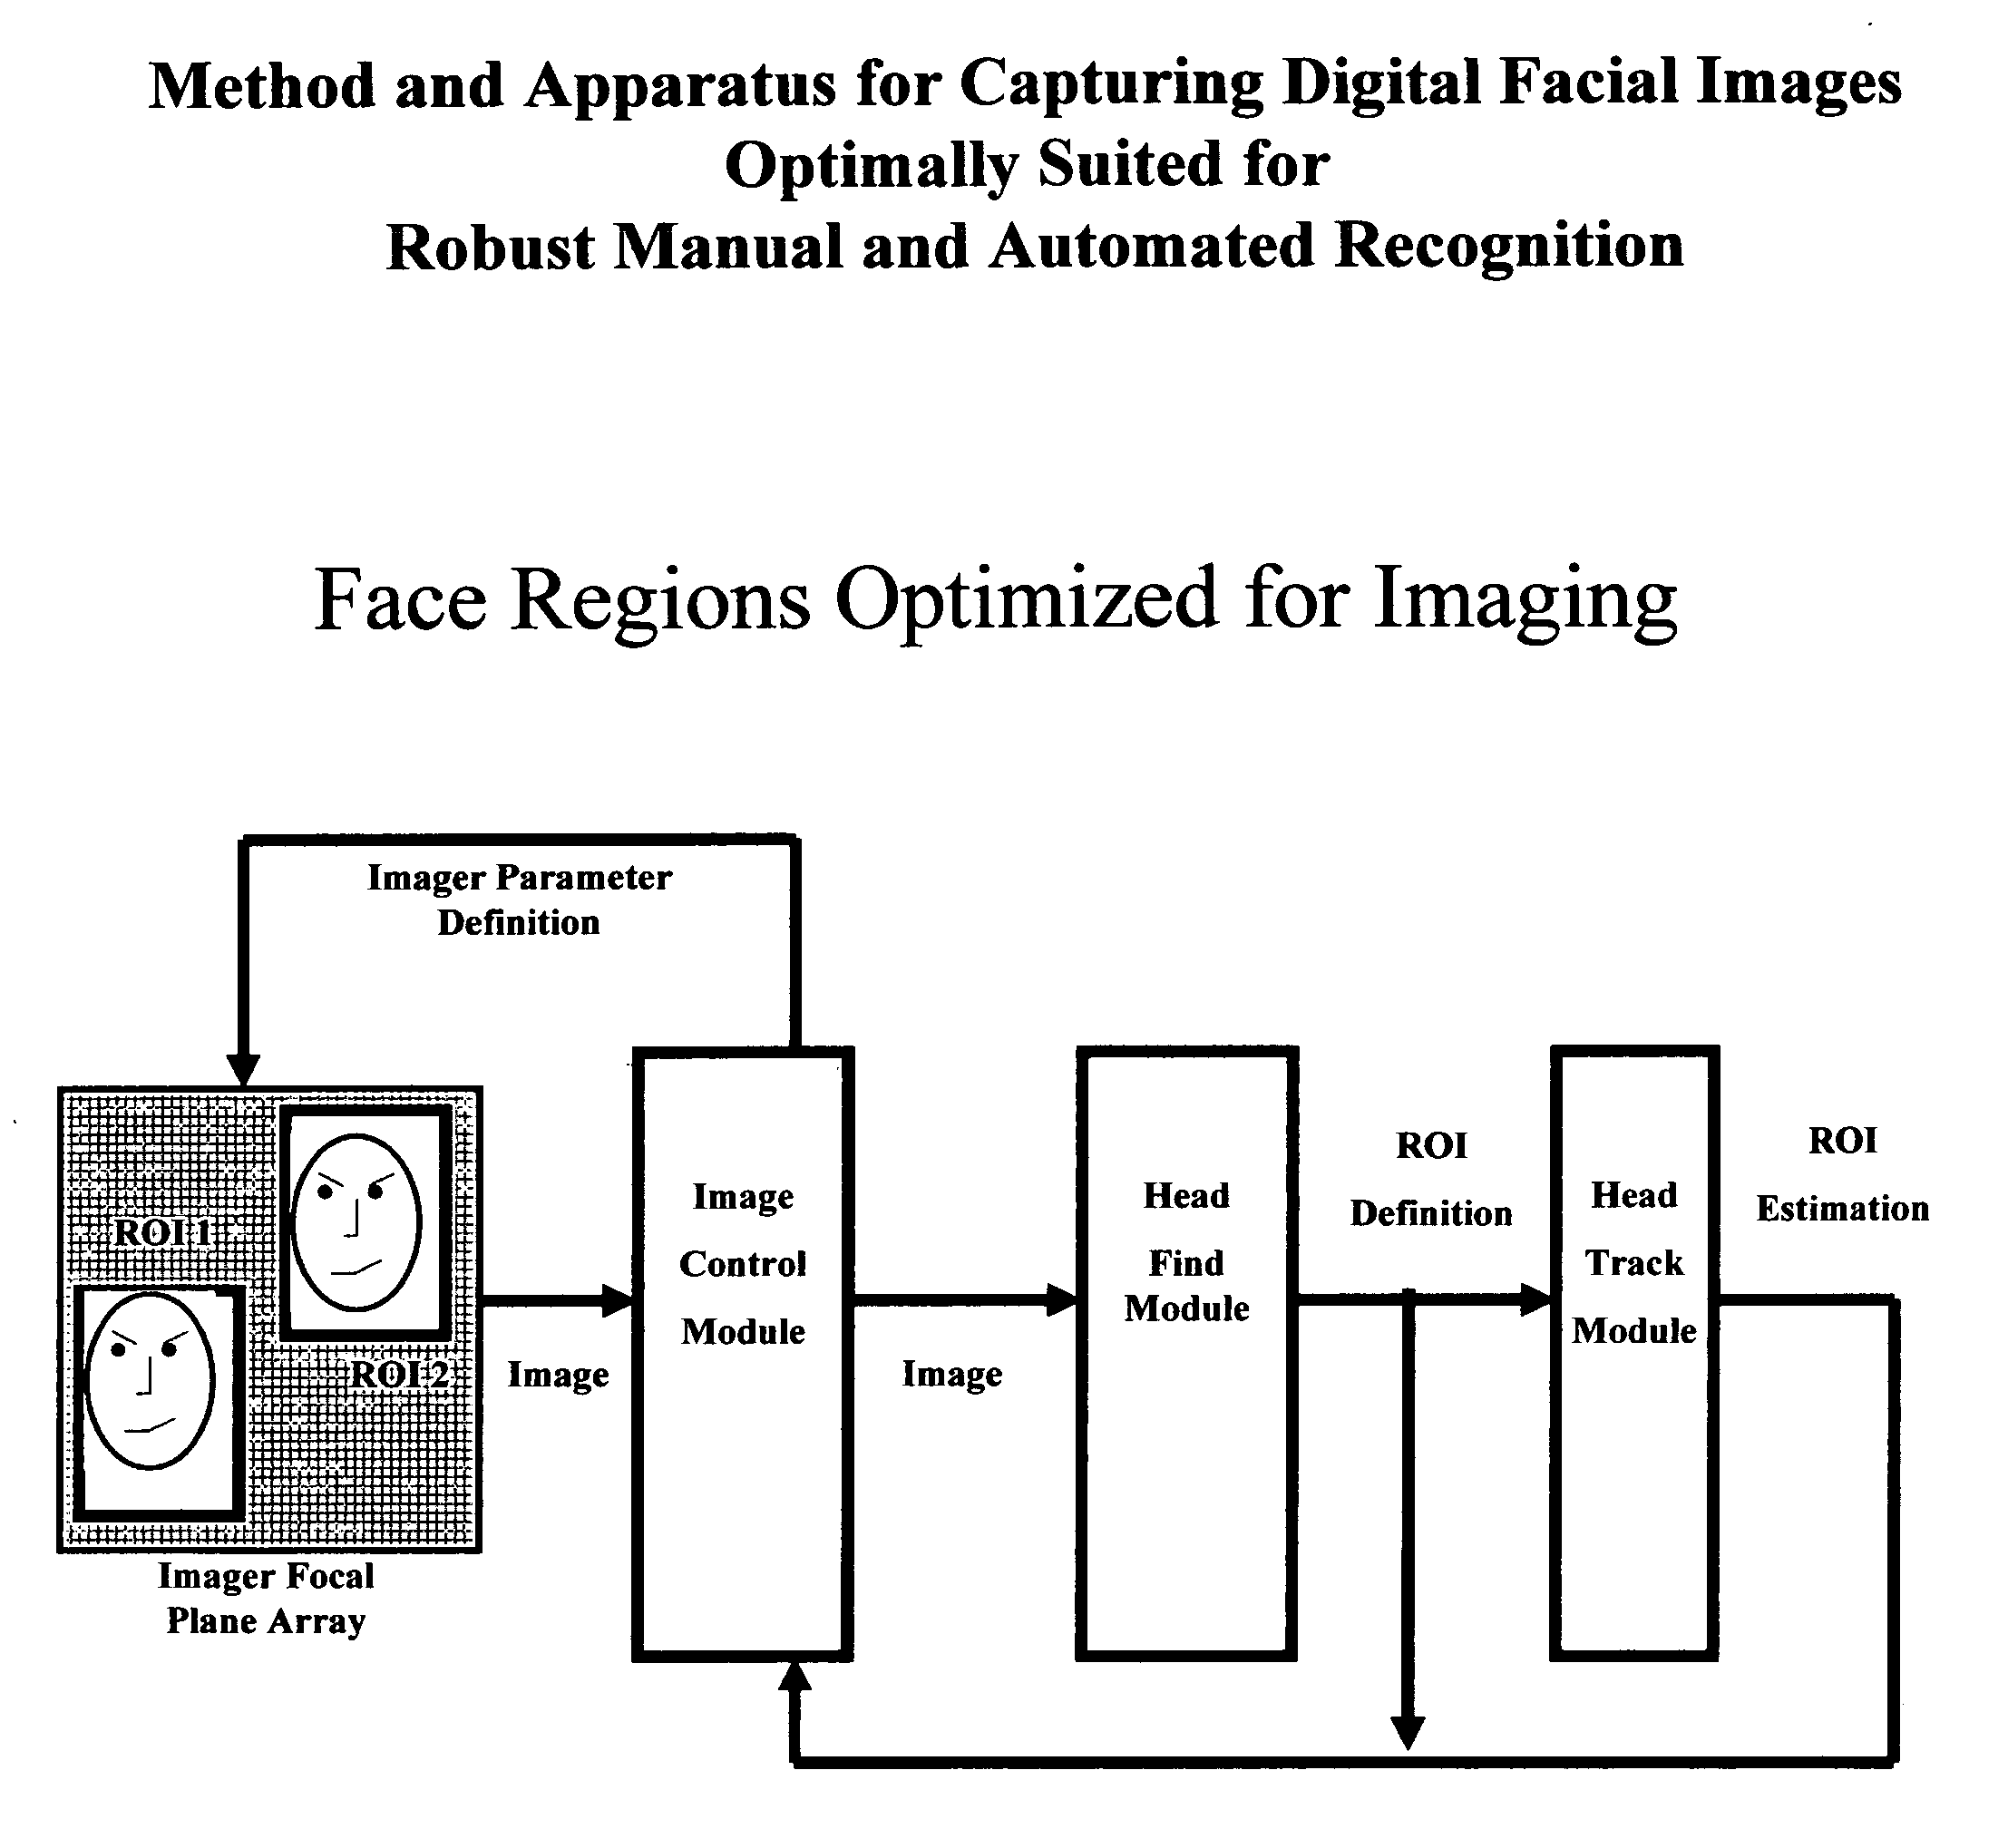 Method and apparatus for capturing digital facial images optimally suited for manual and automated recognition